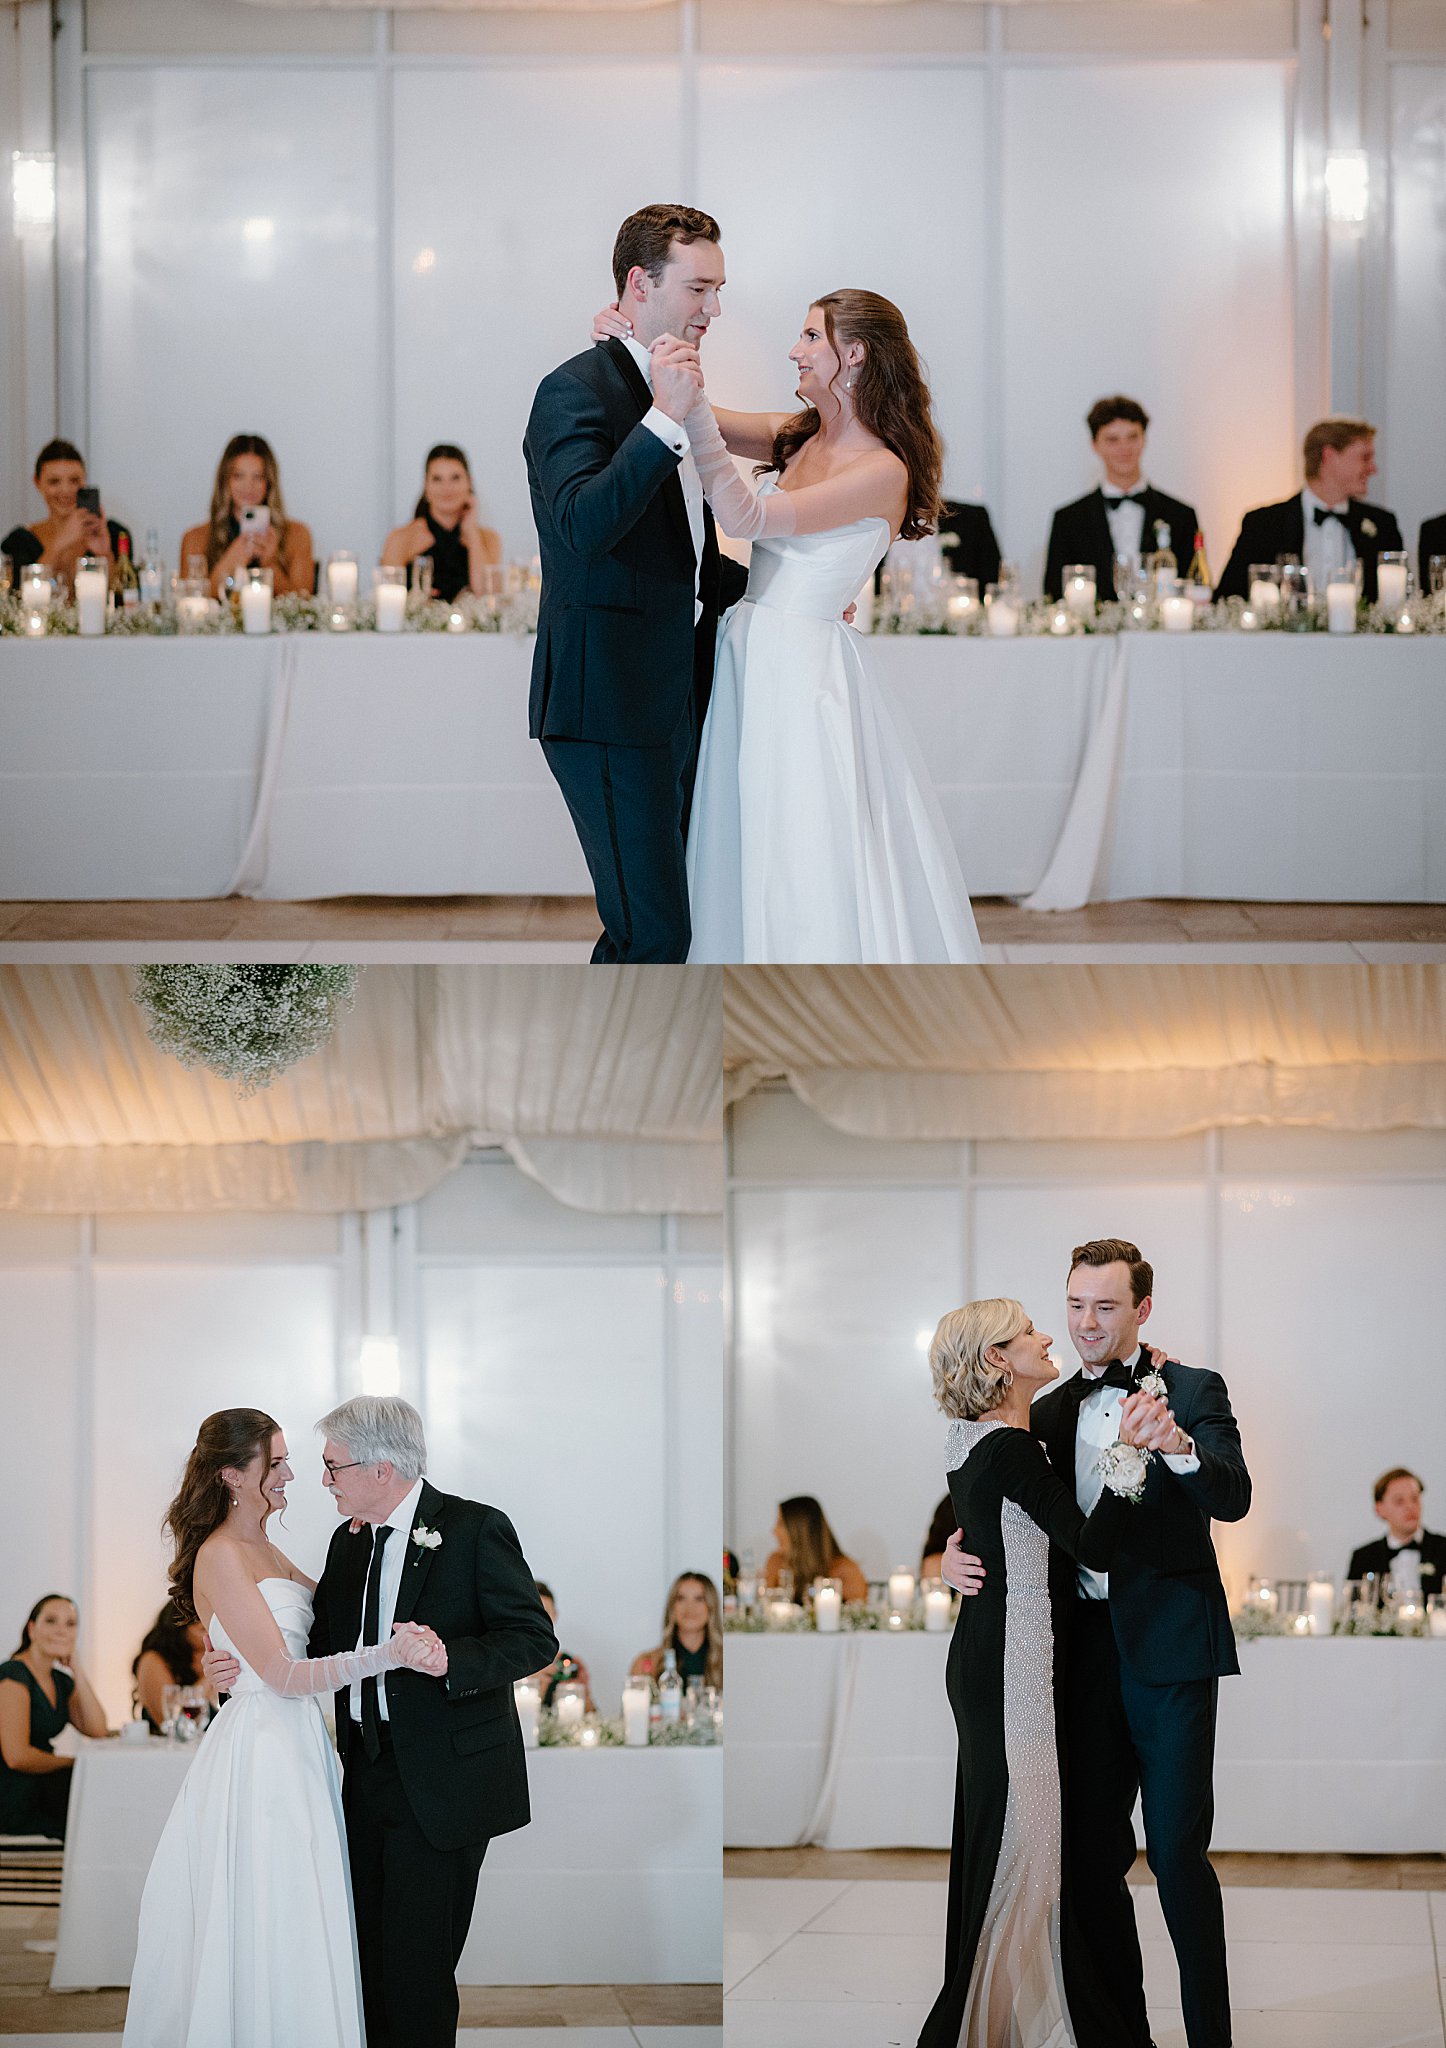 newlyweds share first dance at Galleria Marchetti Reception